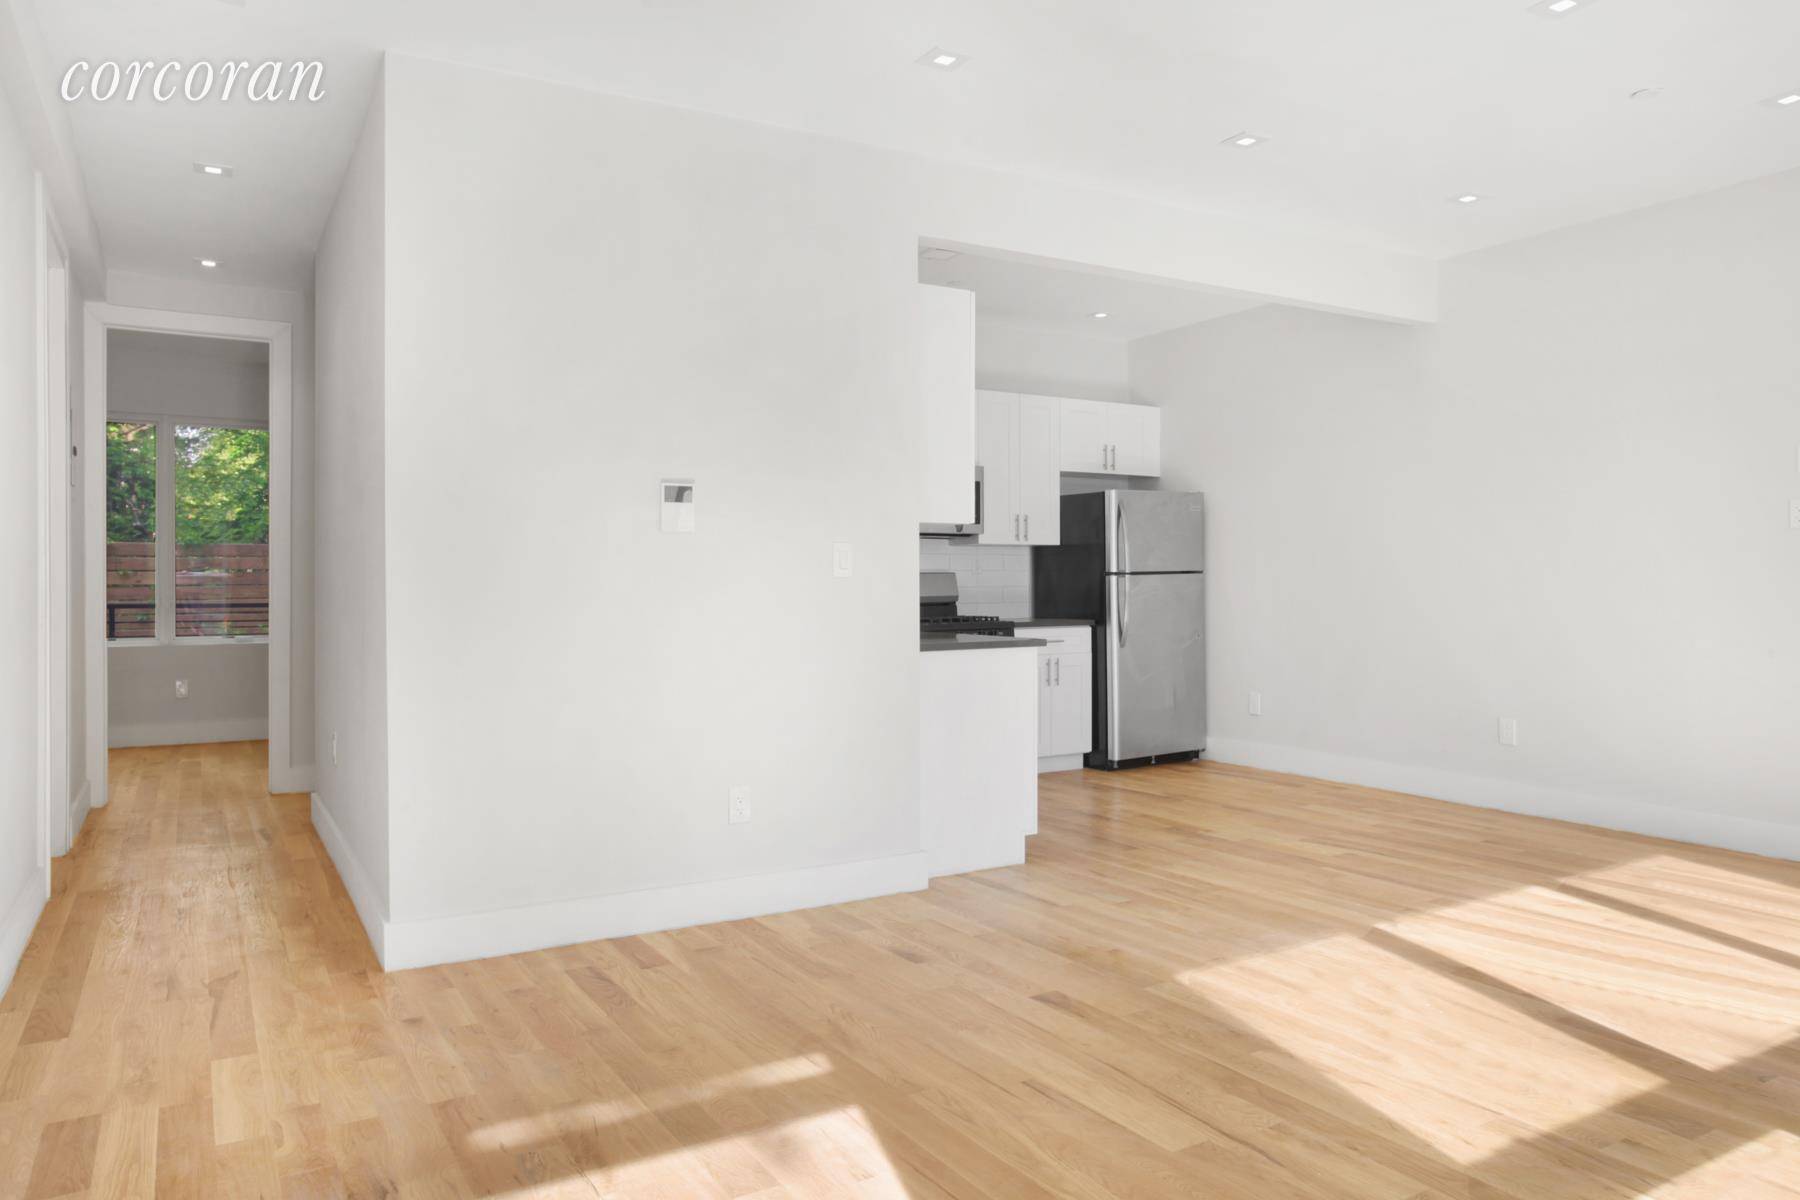 SERENITY 280 Patchen Ave, 1 BEDFORD STUYVESANTLive the life youve always dreamed of in this sprawling garden duplex with elegant interiors that evoke a feeling of sophistication and high end ...